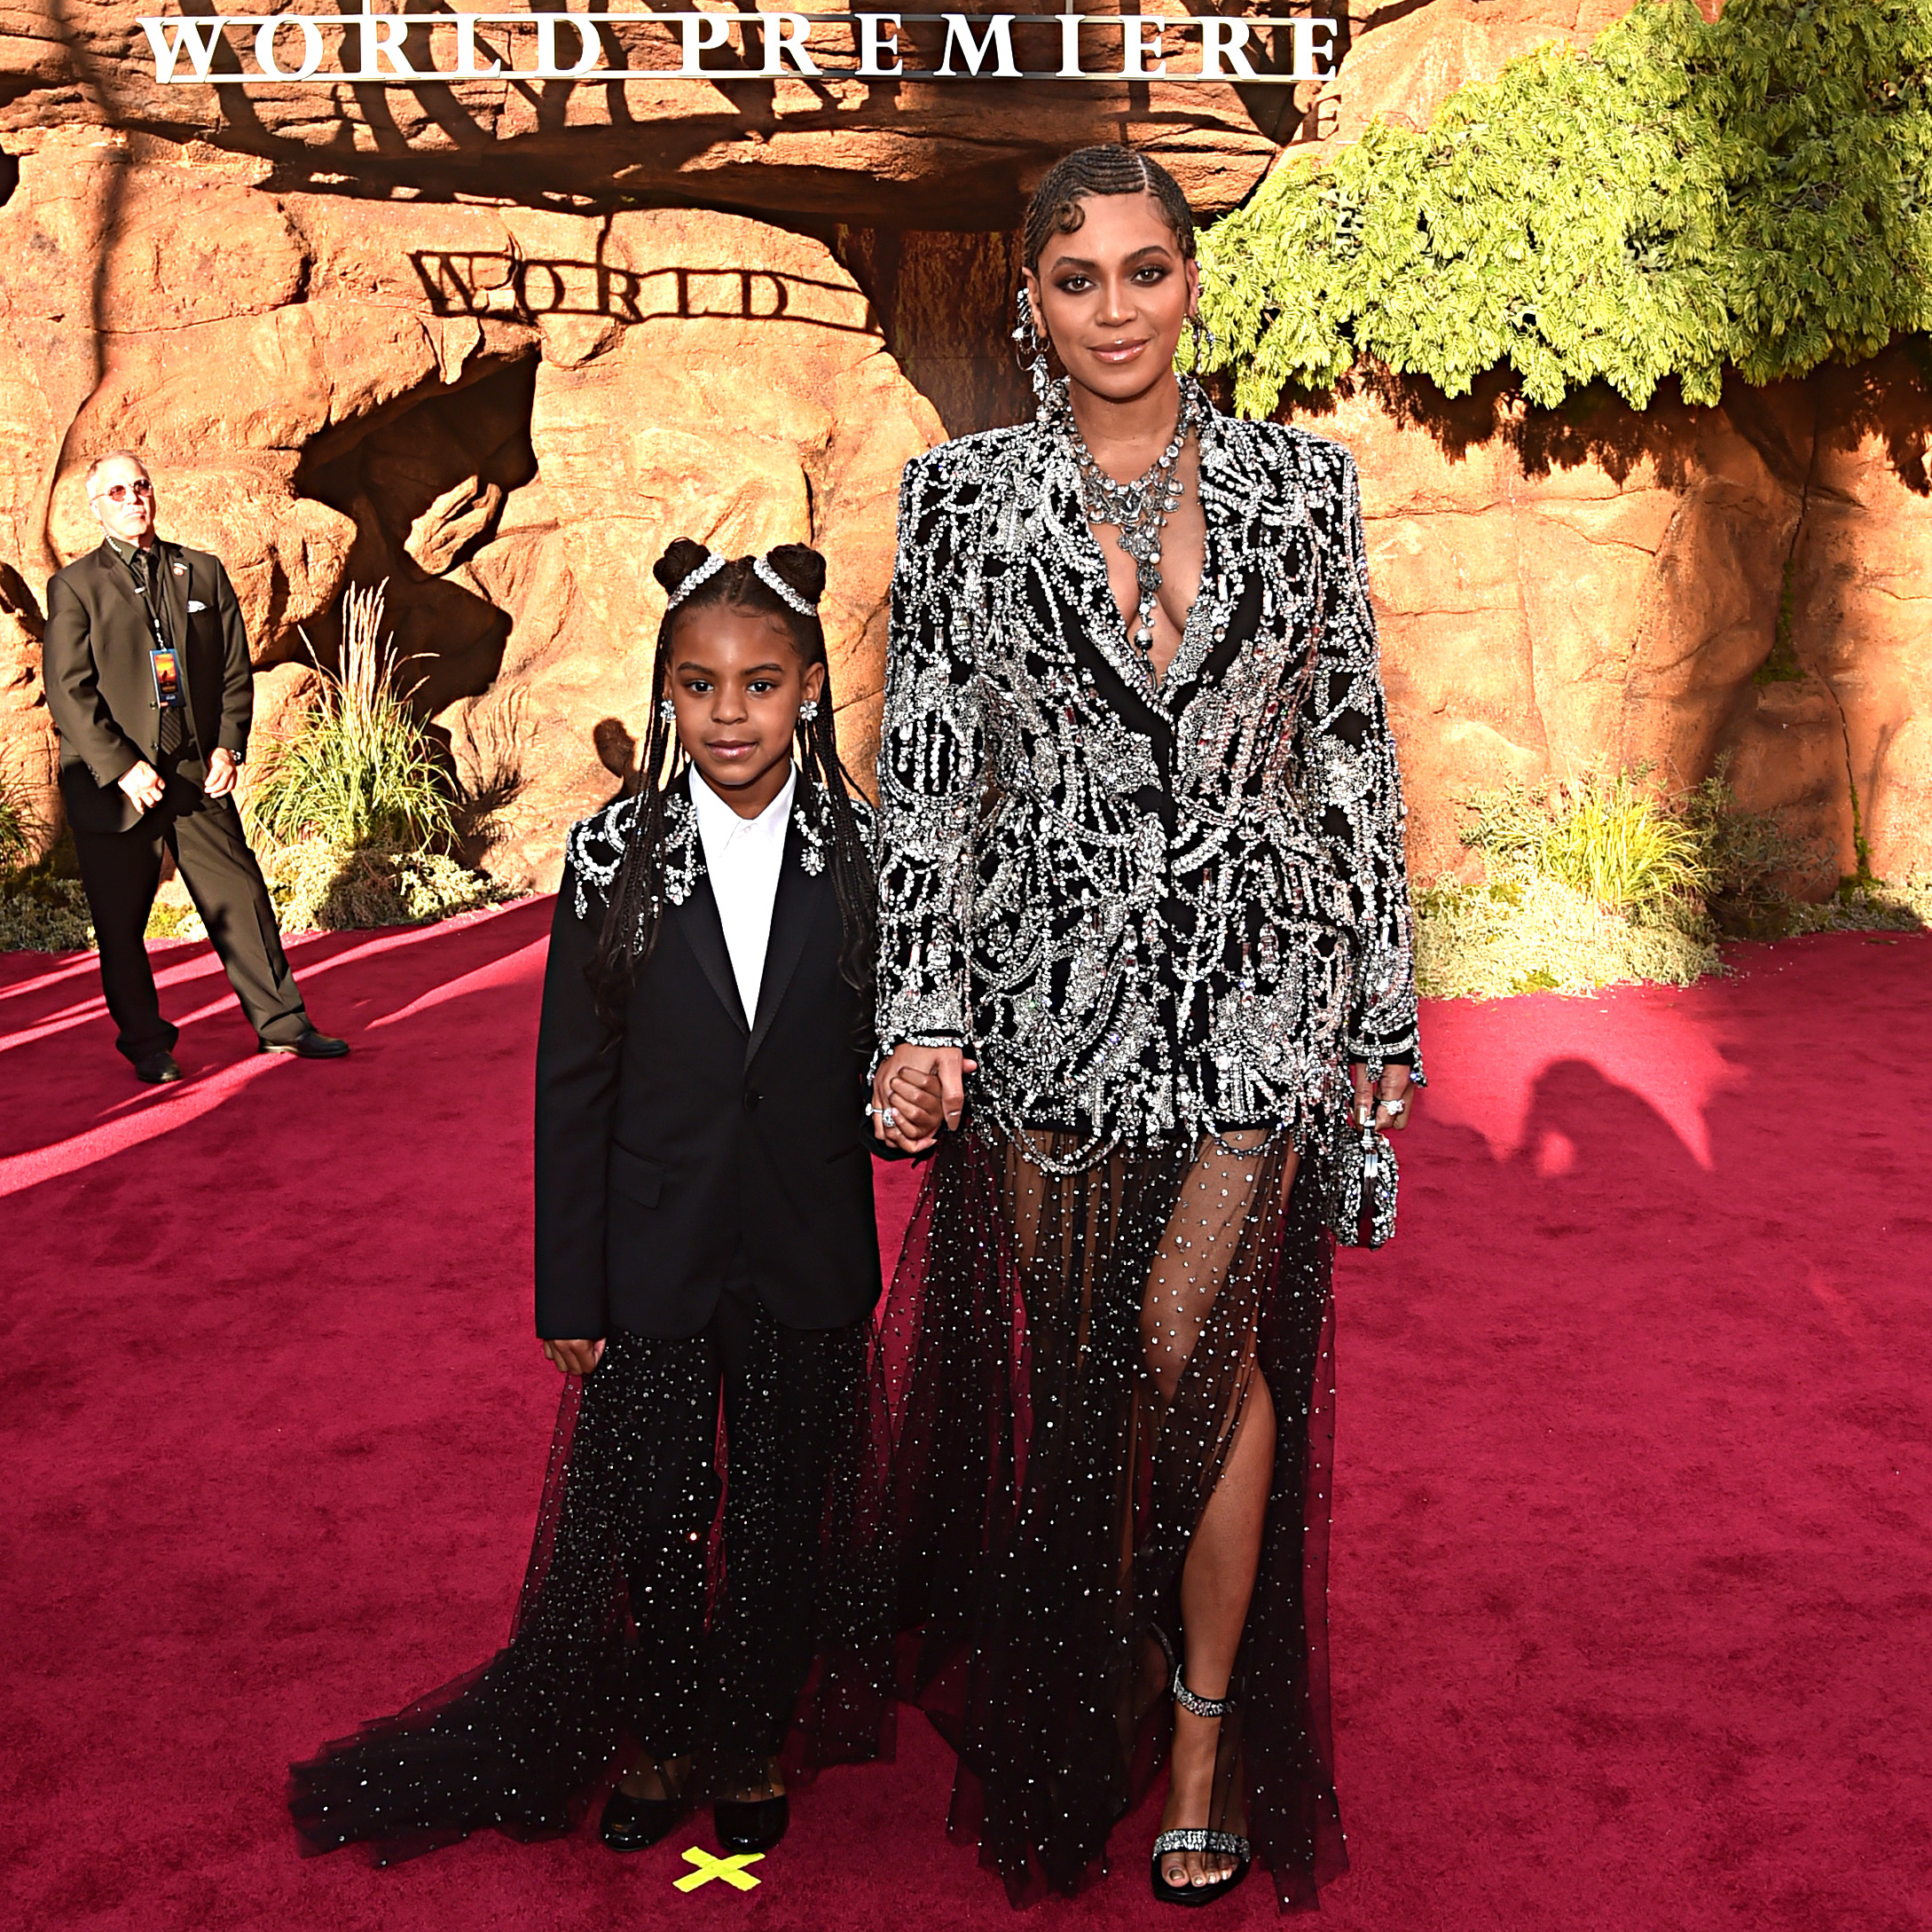 Blue and Beyoncé holding hands on the red carpet